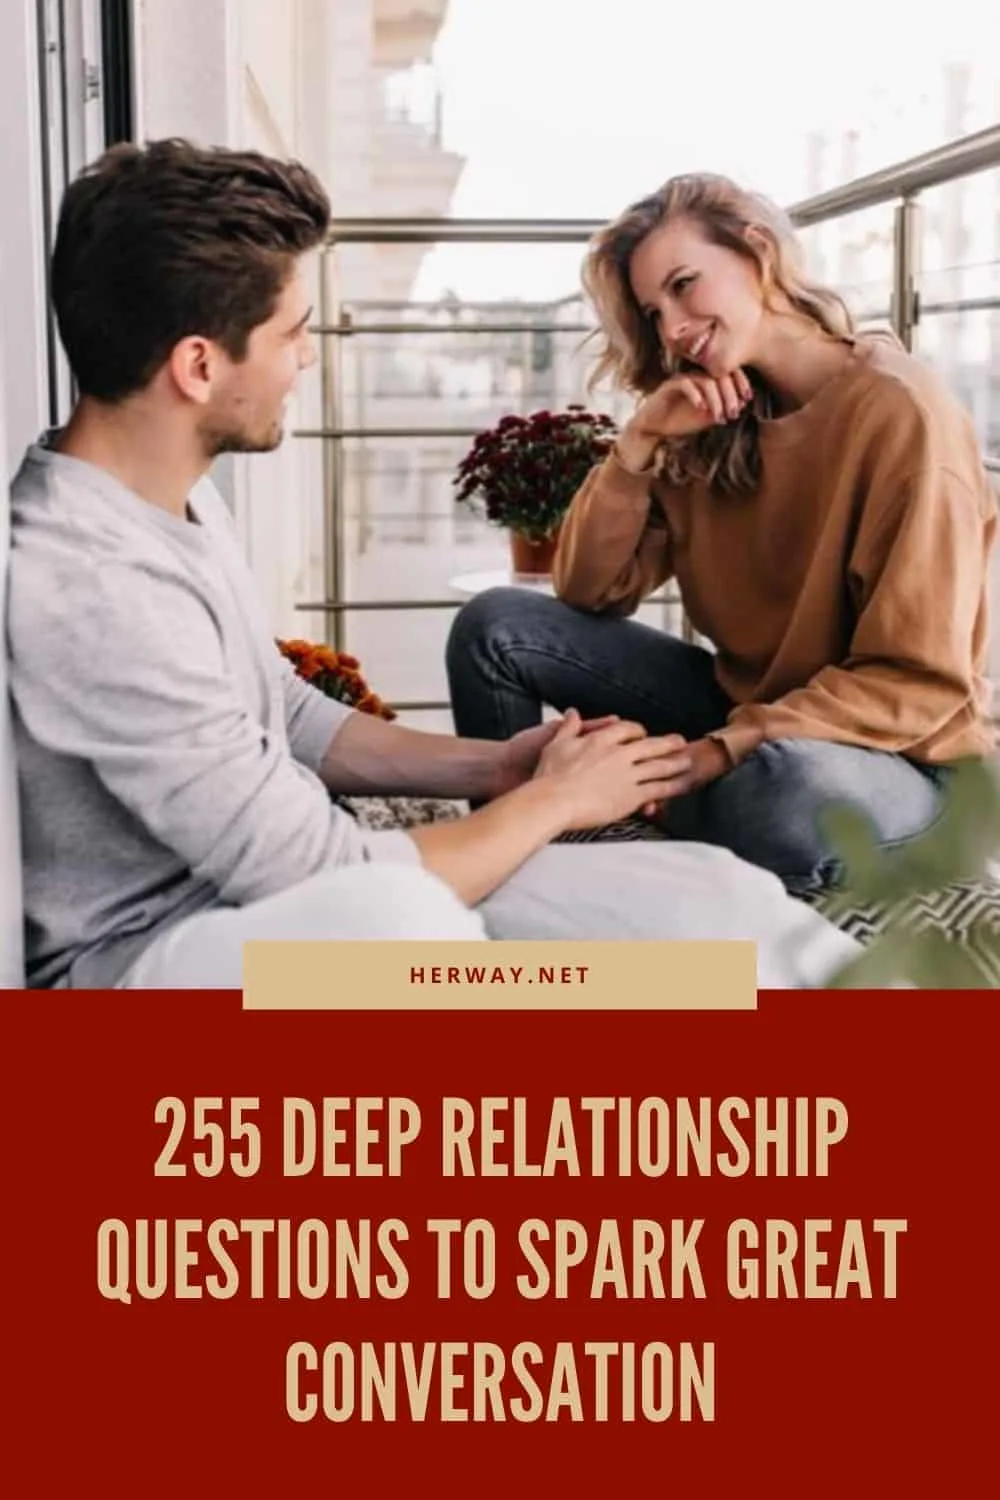 255 Deep Relationship Questions To Spark Great Conversation